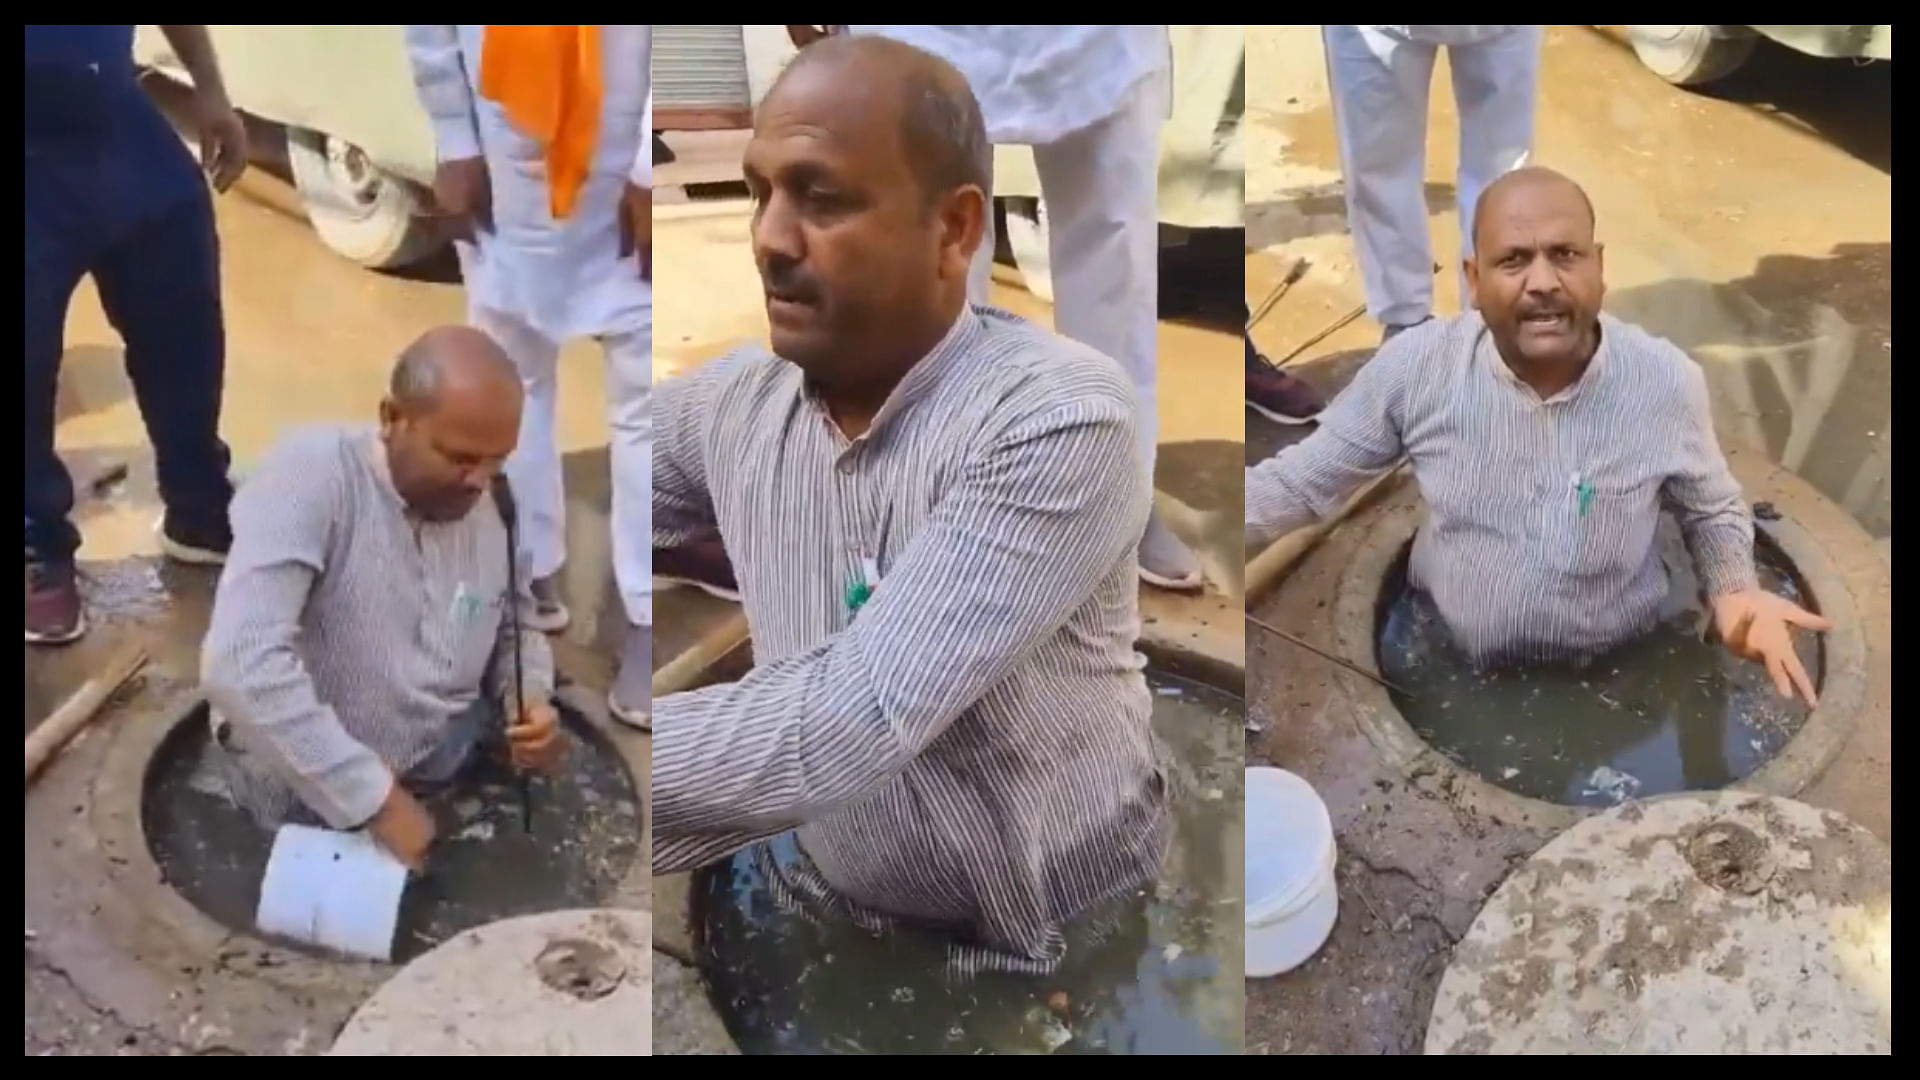 Madhya pradesh gwalior bjp councilor Devendra Rathore in sewer and says officers not listening complaints